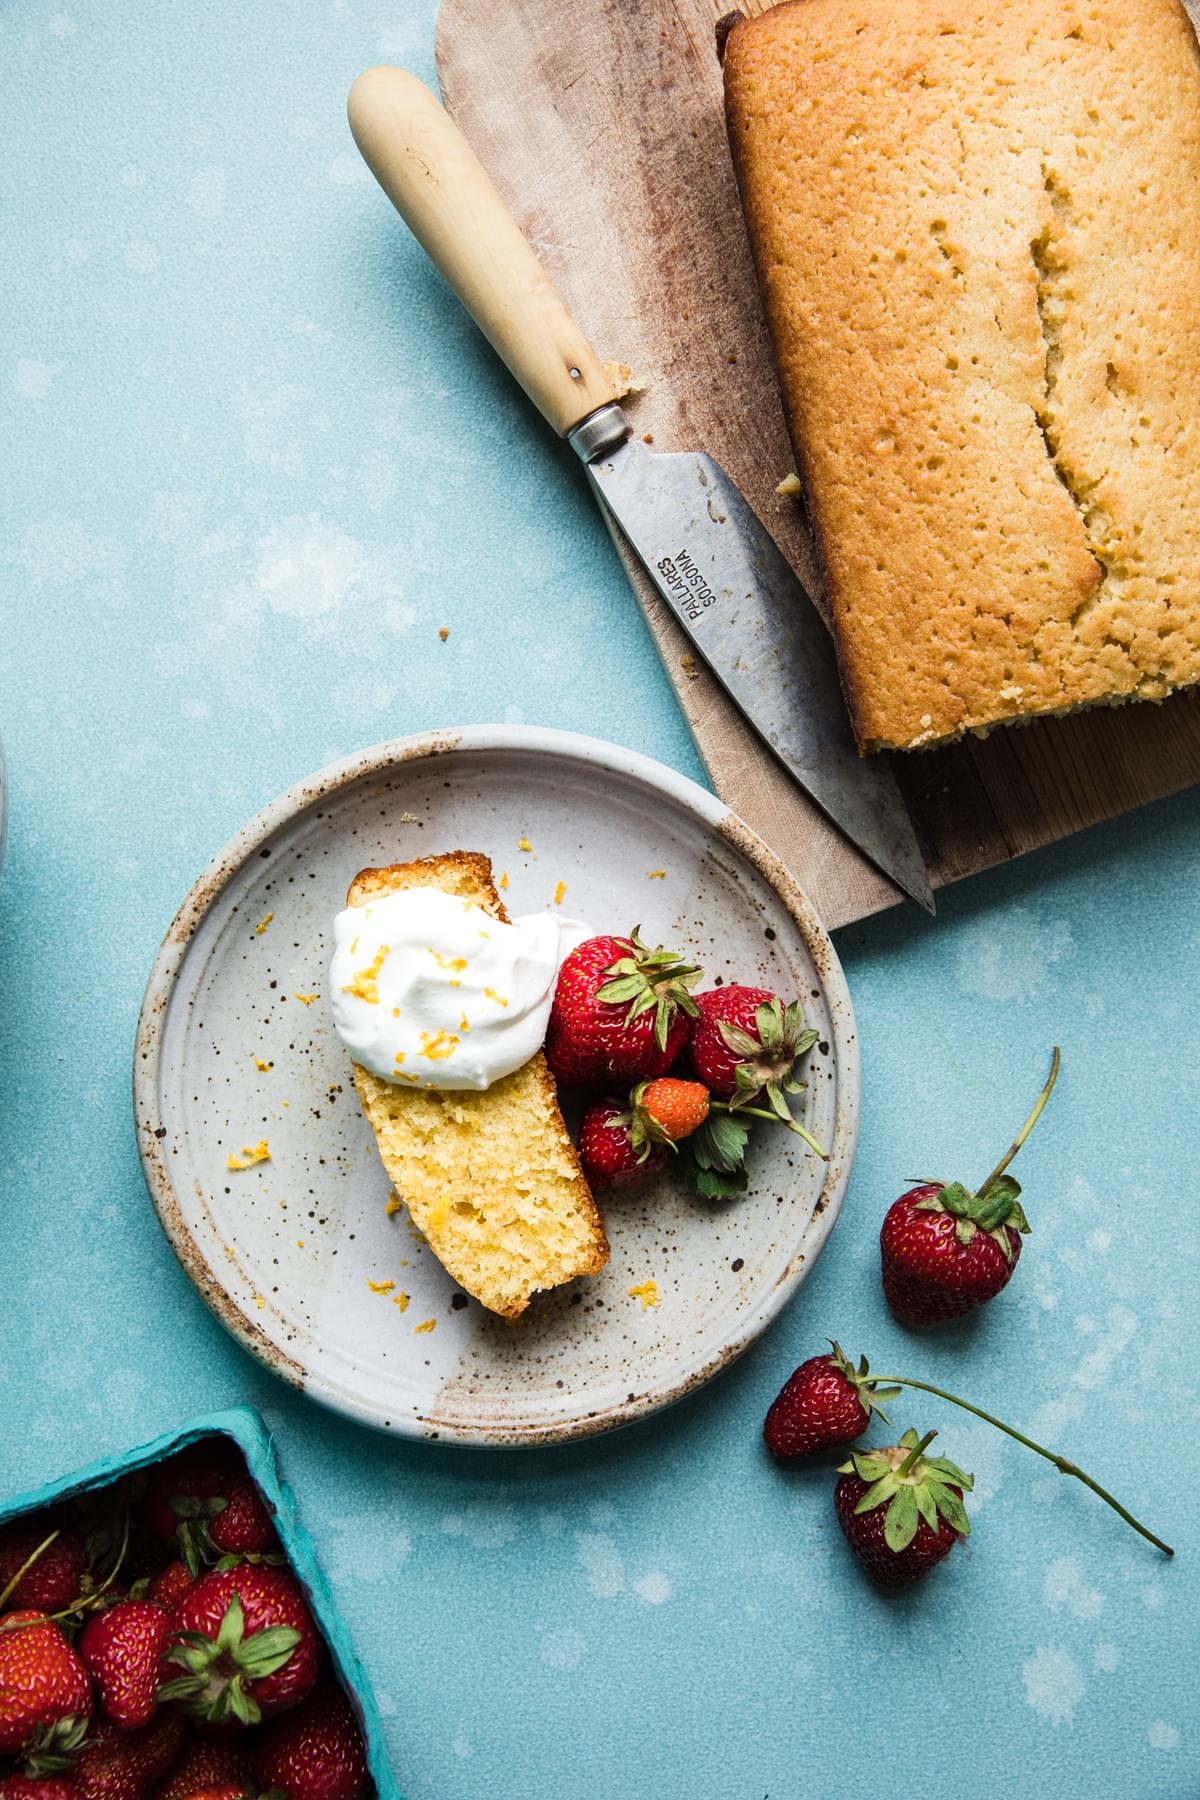 lemon olive oil pound cake with fresh berries and whipped cream,